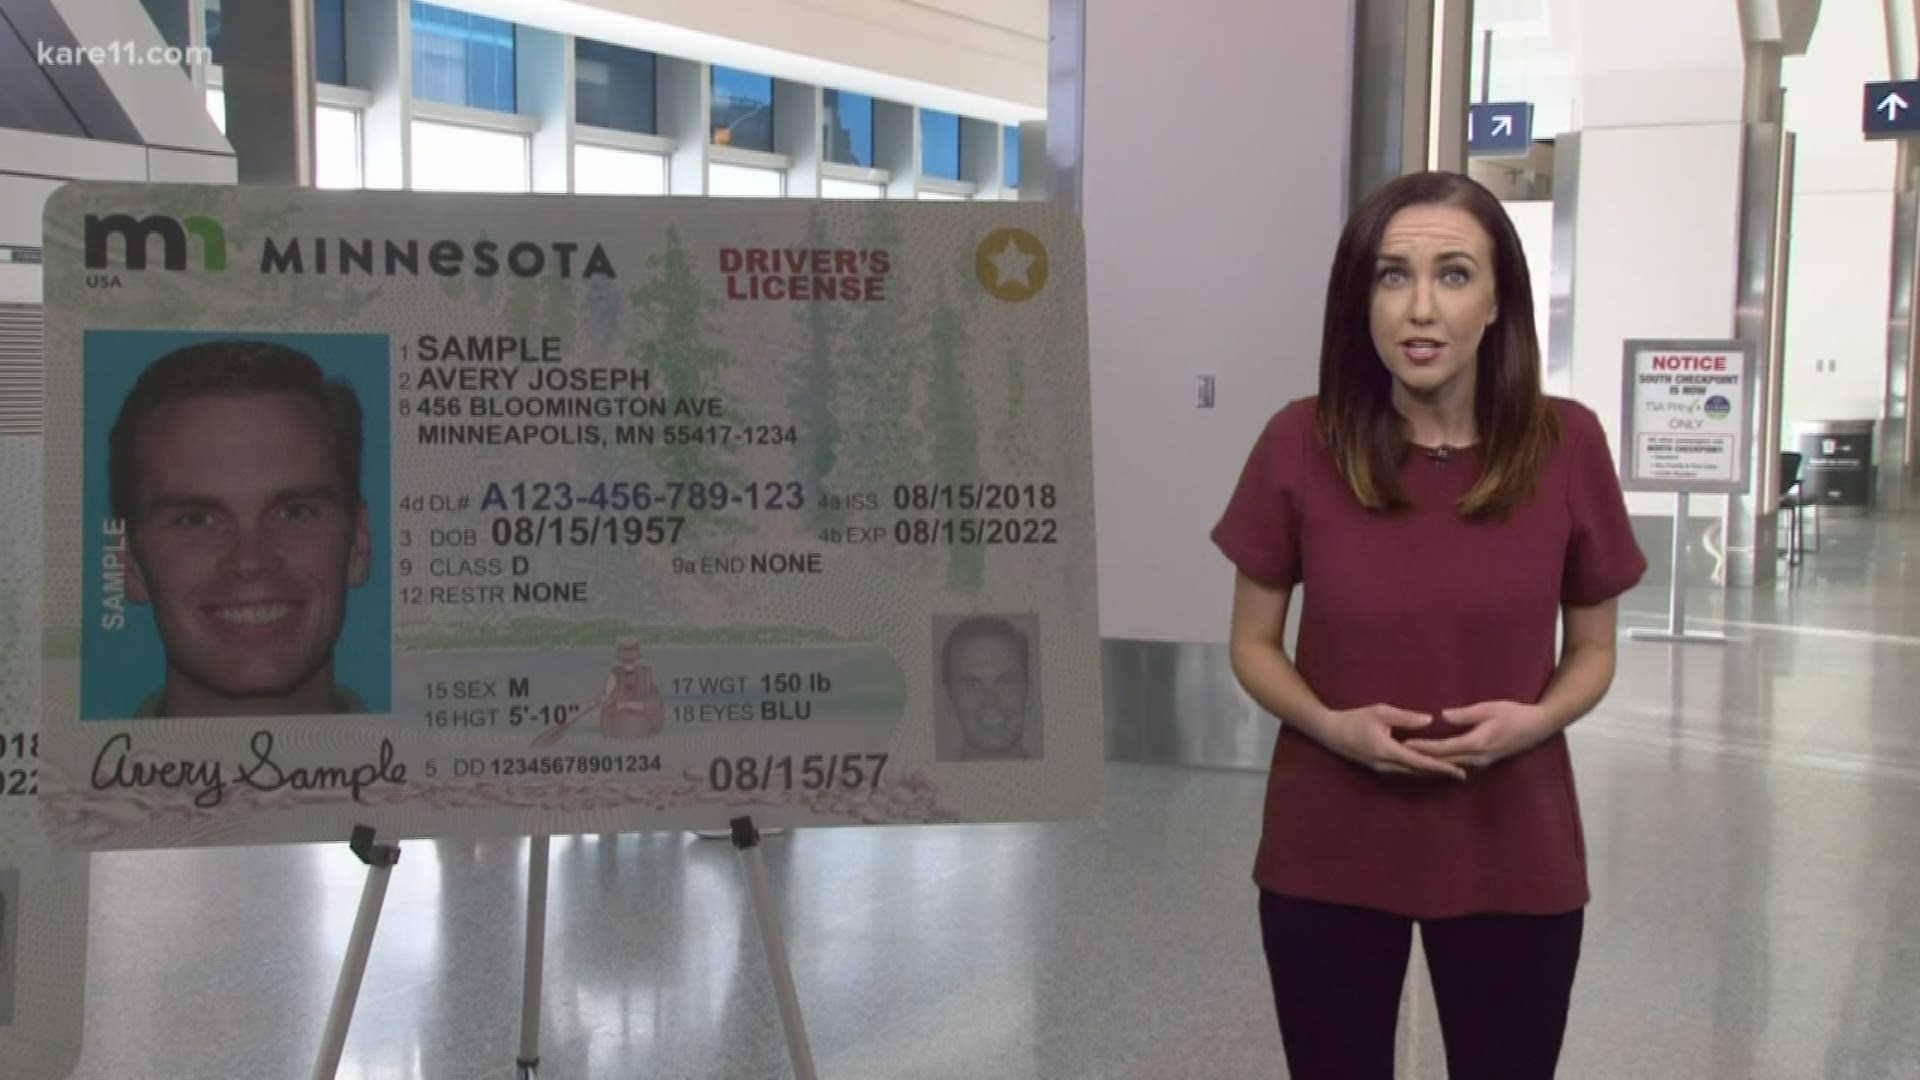 Beginning October 1, 2020 your standard Minnesota driver's license will no longer work for boarding domestic flights. So what do you do? Here's a breakdown.